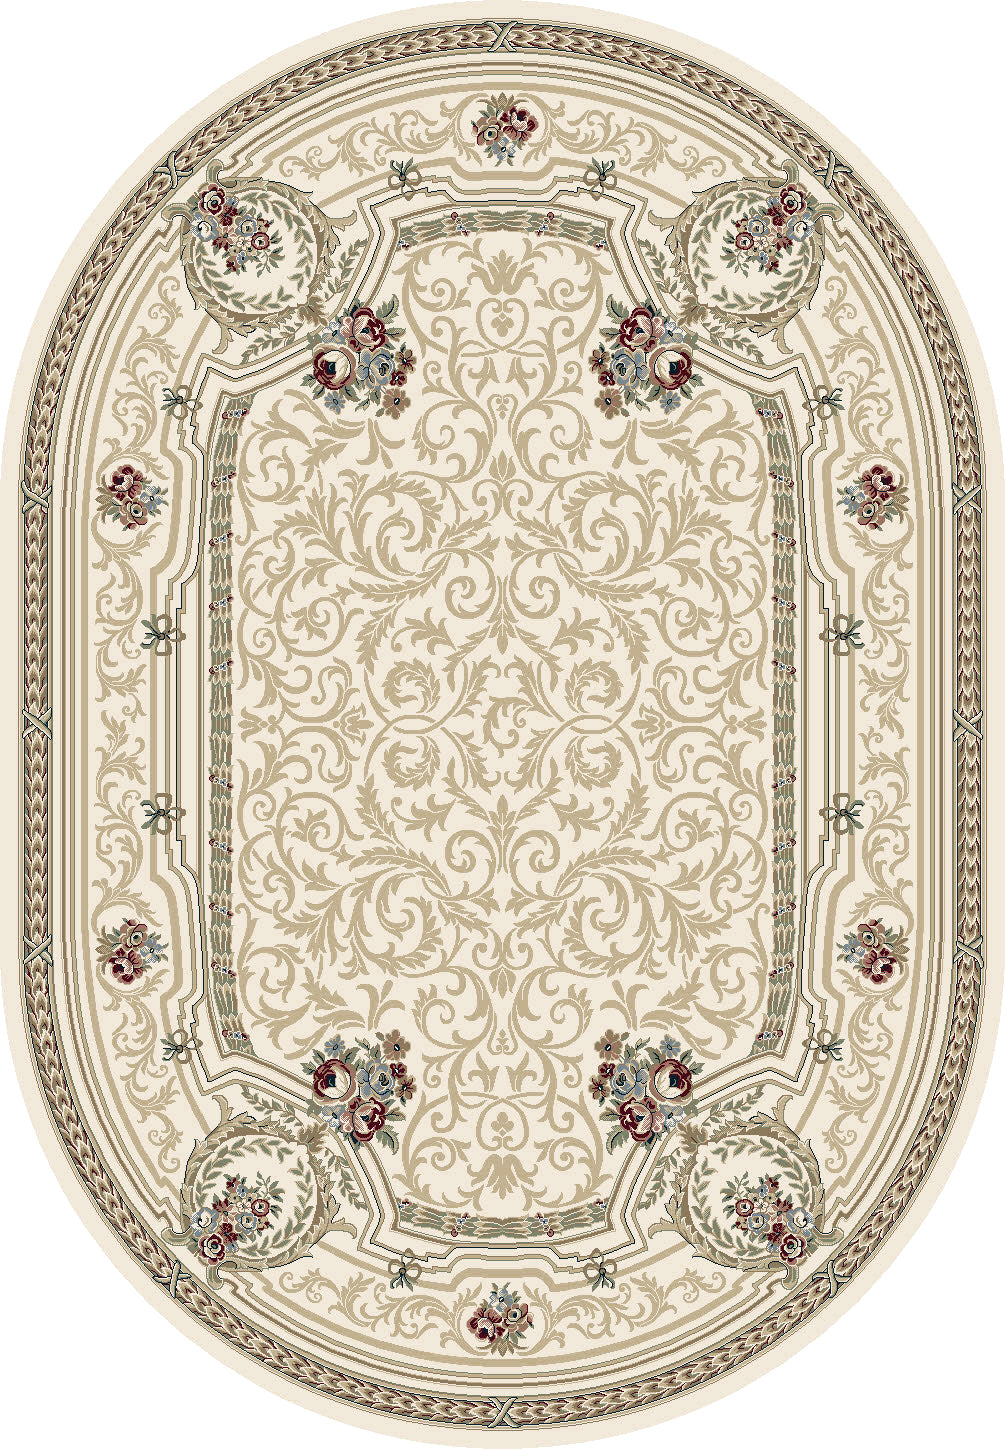 Dynamic Rugs Ancient Garden 57091-6464 Ivory Area Rug